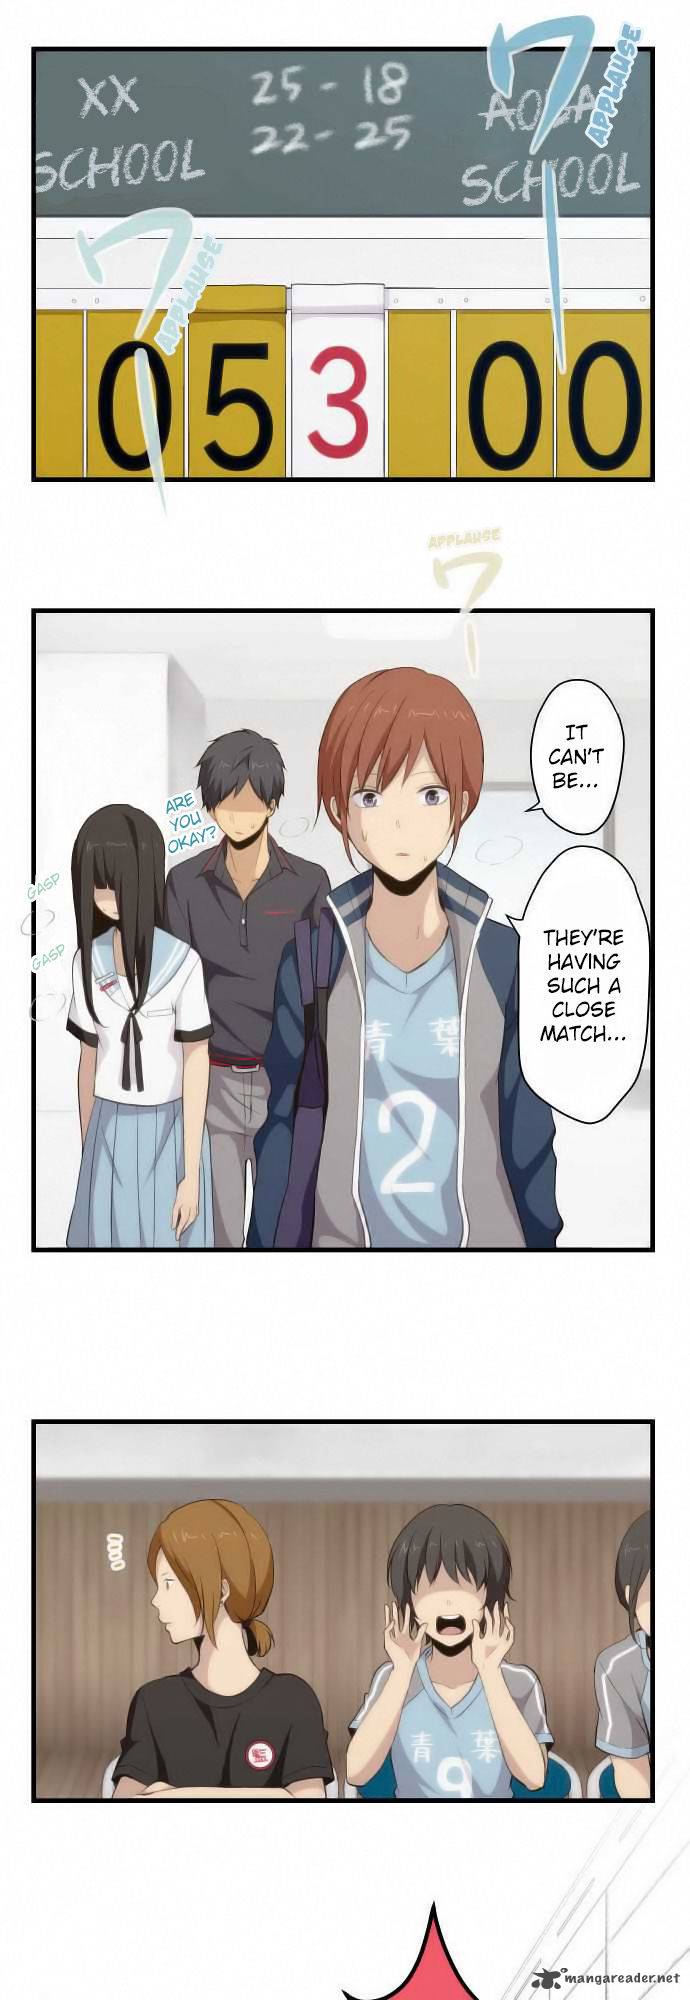 Relife 82 4